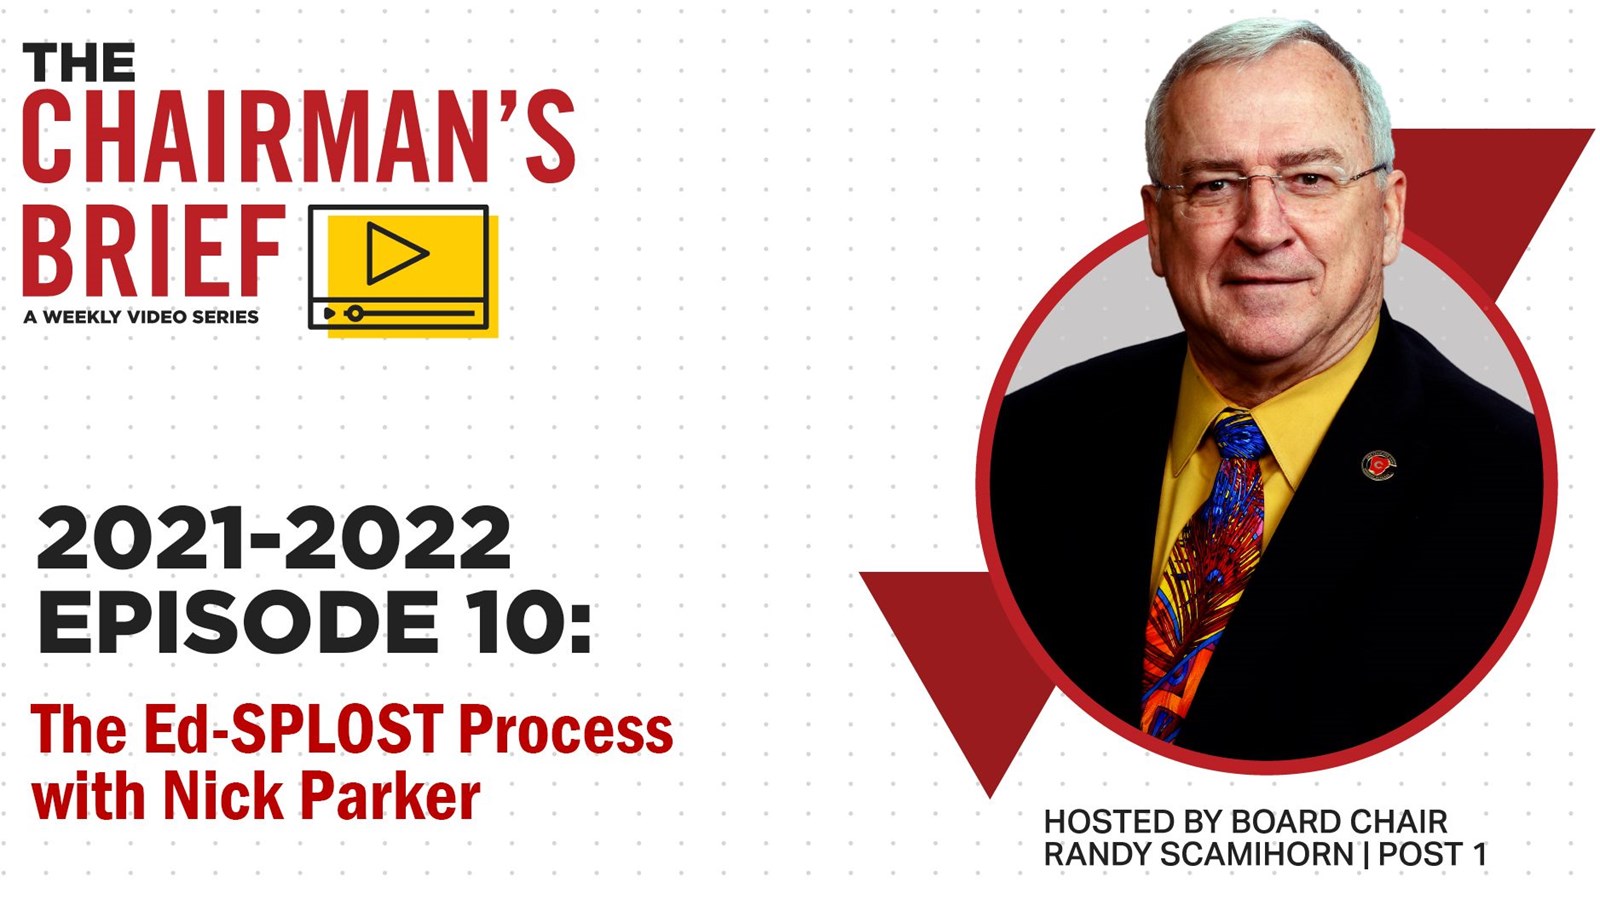 The Chairman's Brief: The Ed-SPLOST Process with Nick Parker